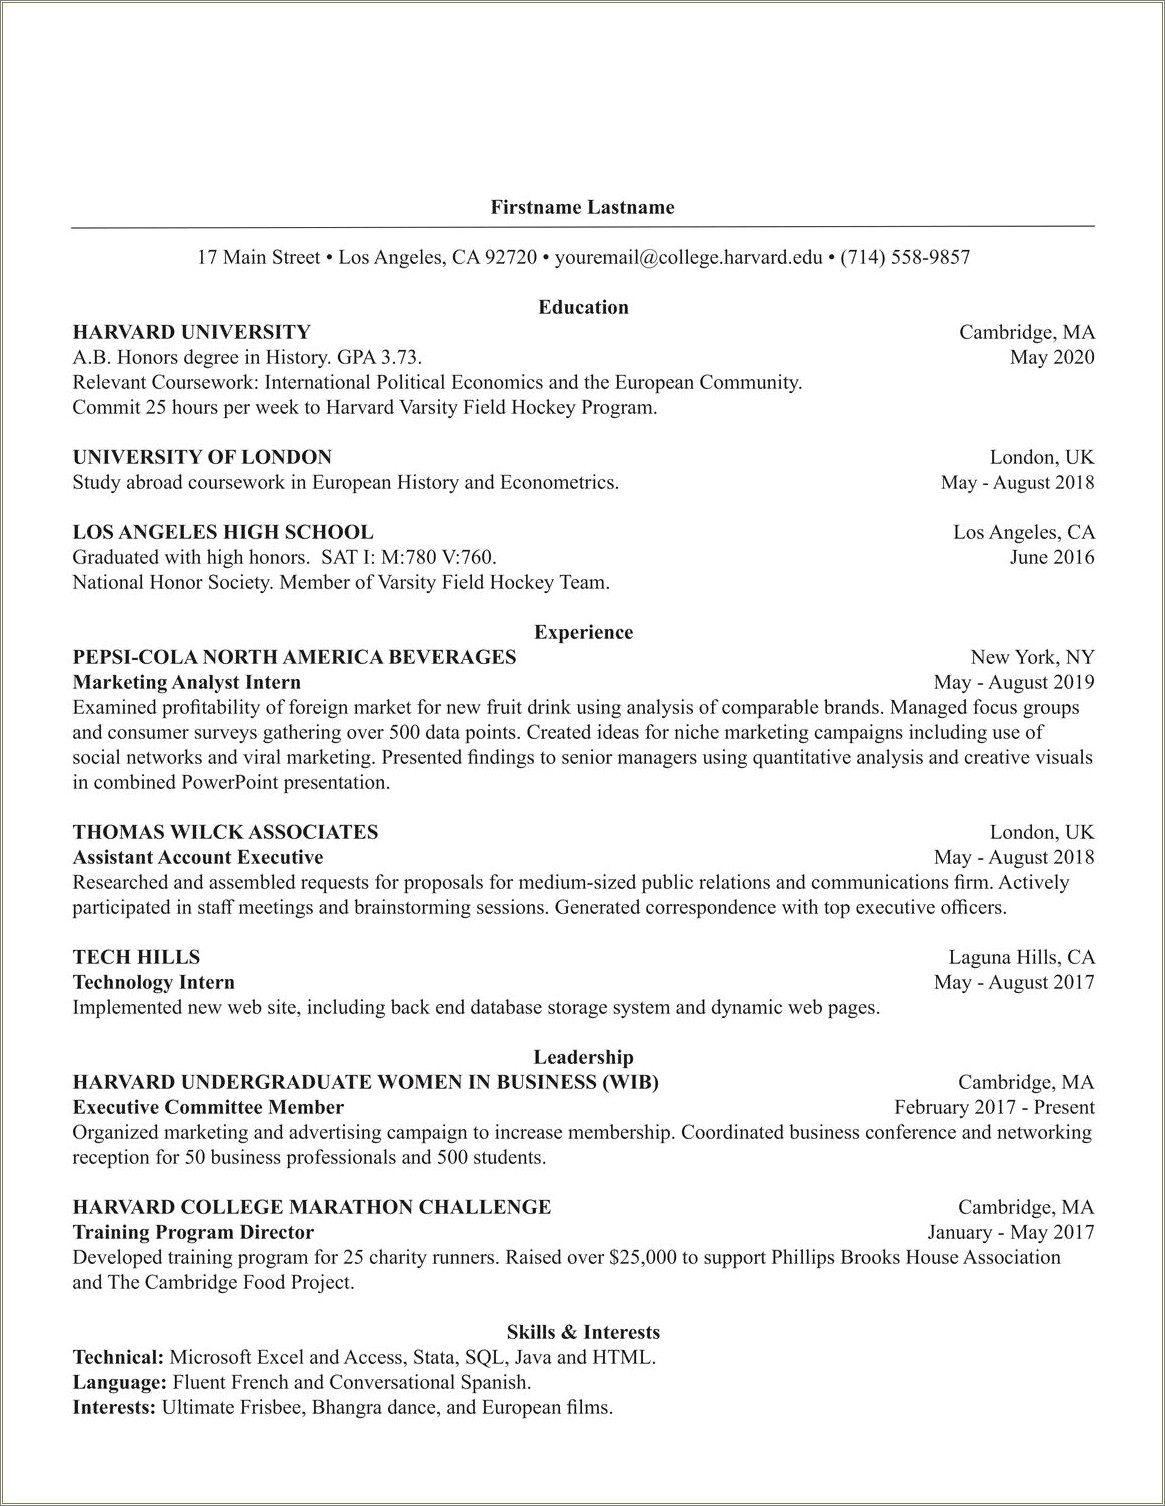 Example Resume For An Au Pair